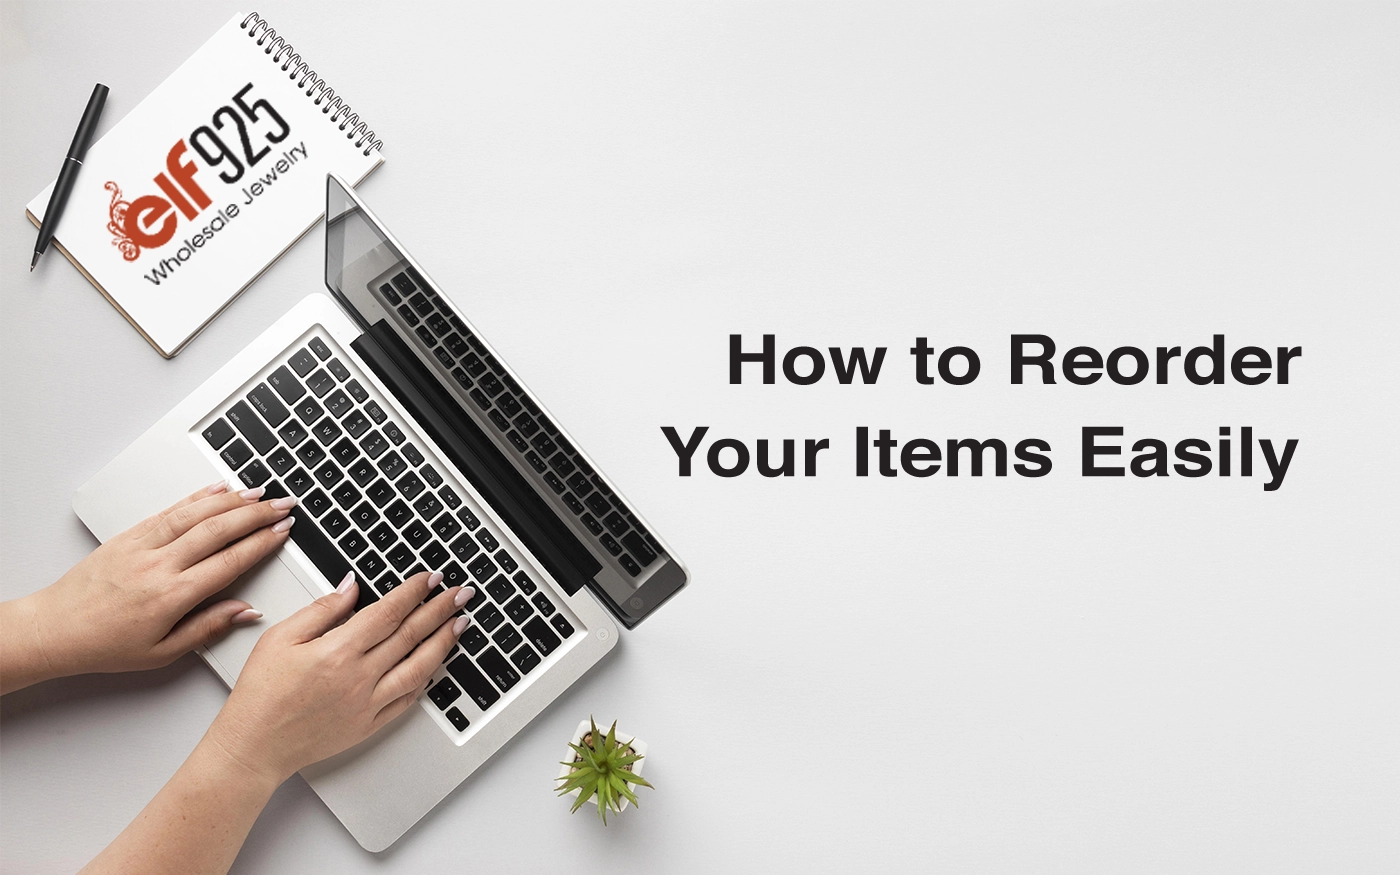 How to quickly reorder items on